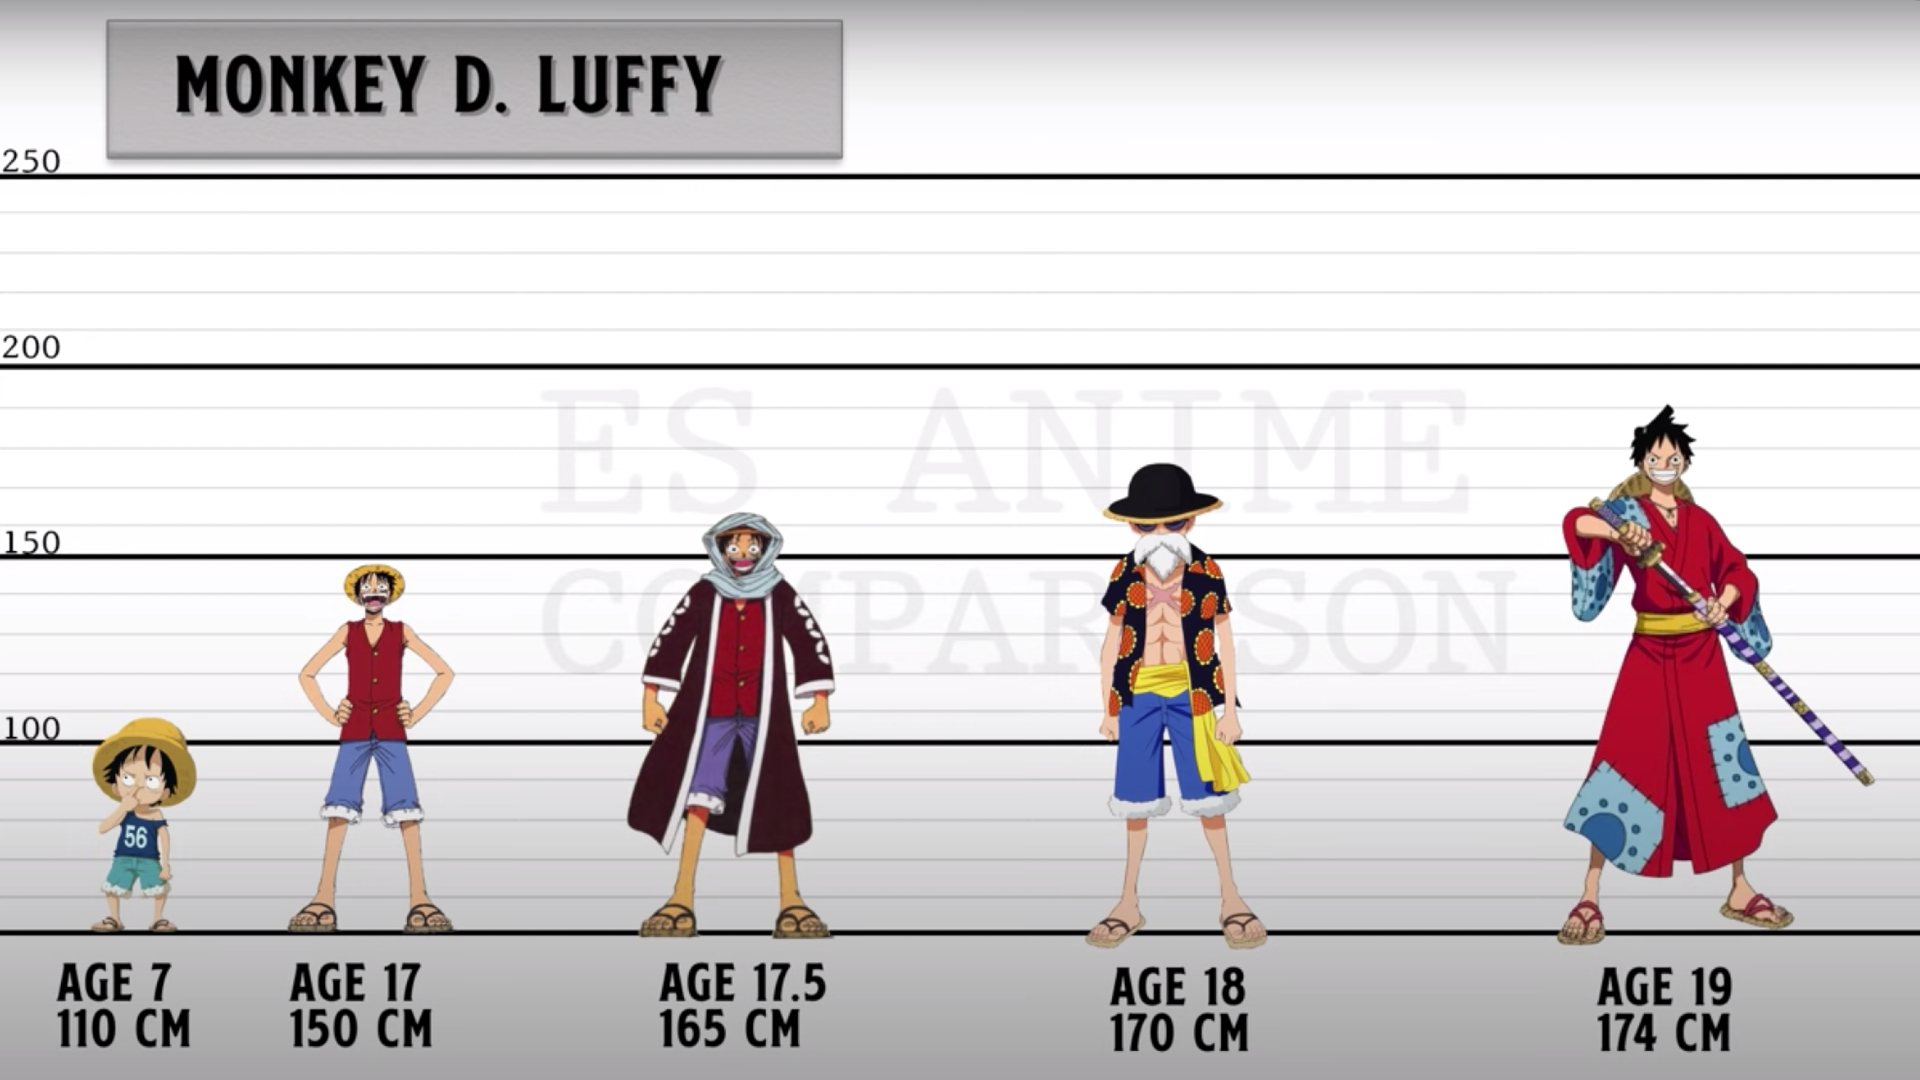 What age is Luffy?